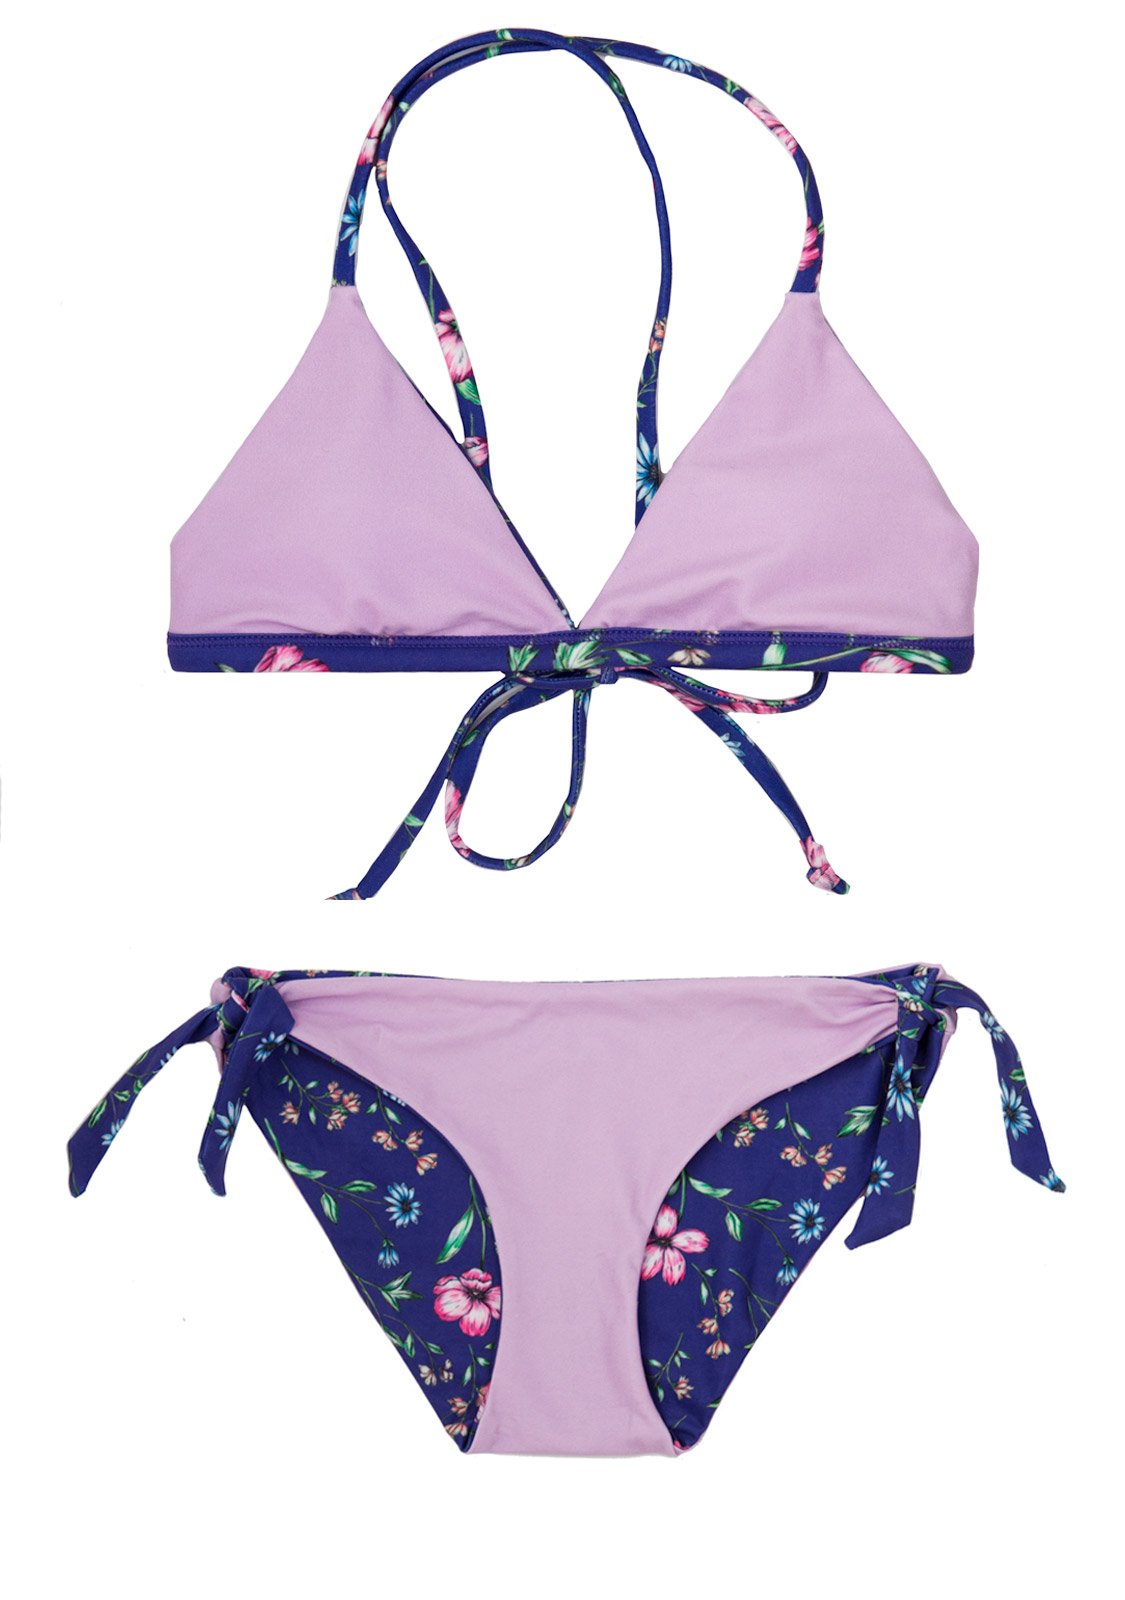 Purple Floral Bikini - 2 Piece SET for Girls with Padded TRIANGLE Top ...